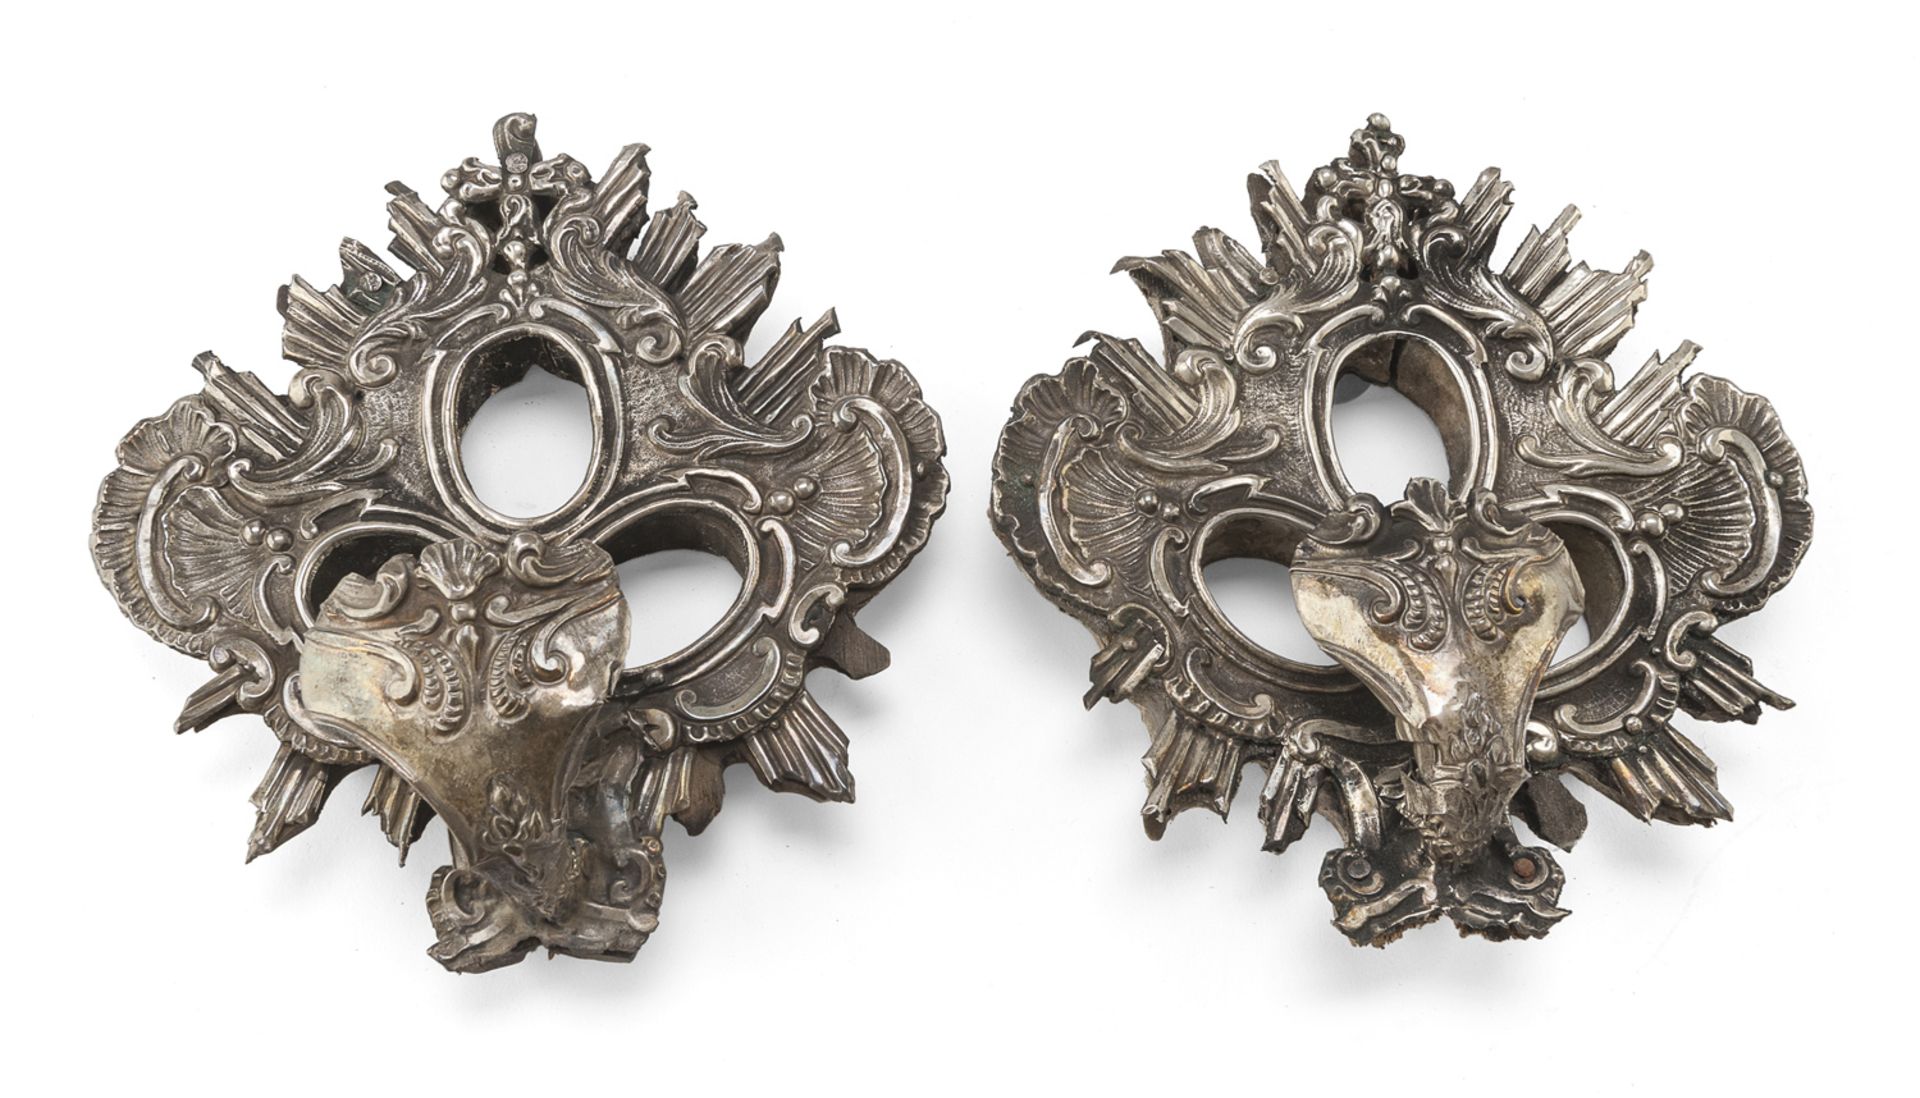 TWO SILVER RELIQUARIES PROBABLY ITALY 19TH CENTURY